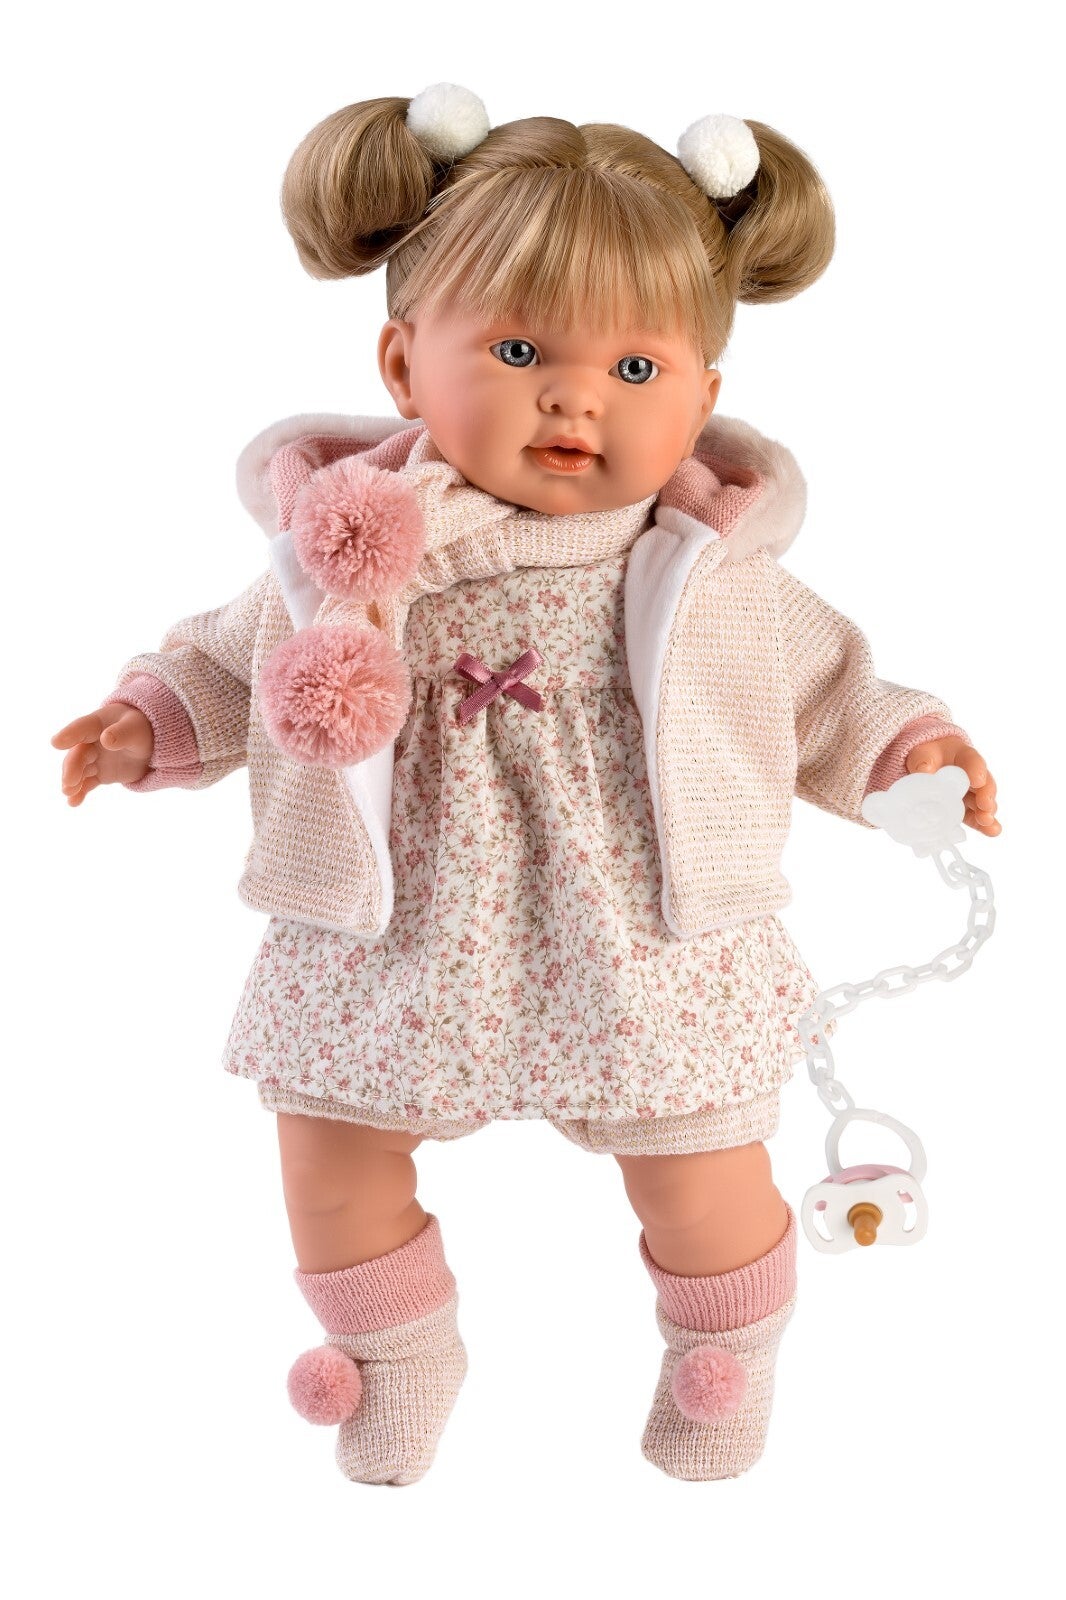 Spanish Crying Baby Girl Doll 42cm include gift box 